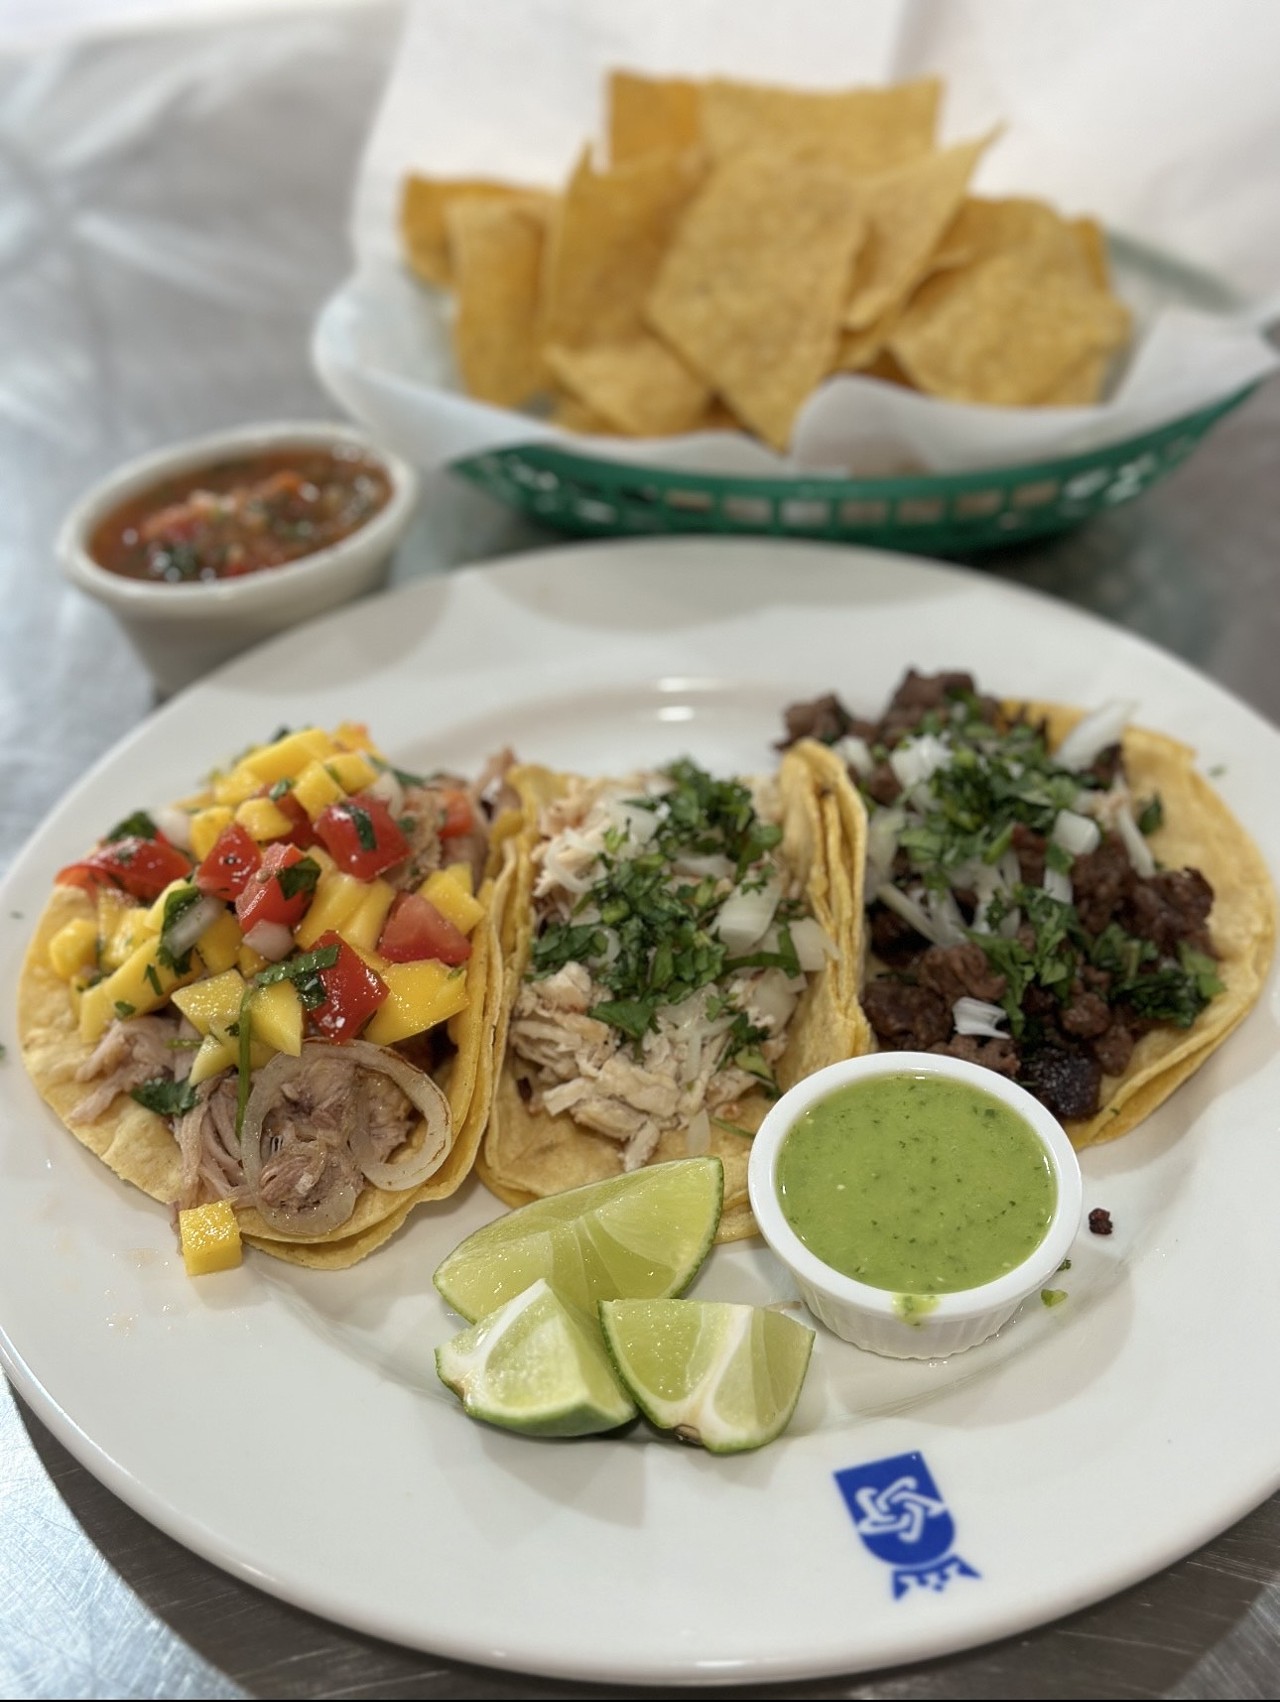 El Rinconcito Chapin
3 TACOS SPECIAL
Chicken: Topped with onions and cilantro side of green salsa
Steak: Topped with onion and cilantro side of green salsa
Carnitas: Topped with onion and cilantro side of green salsa 
The 3 taco special is going to include a side of chips and salsa all for $10.